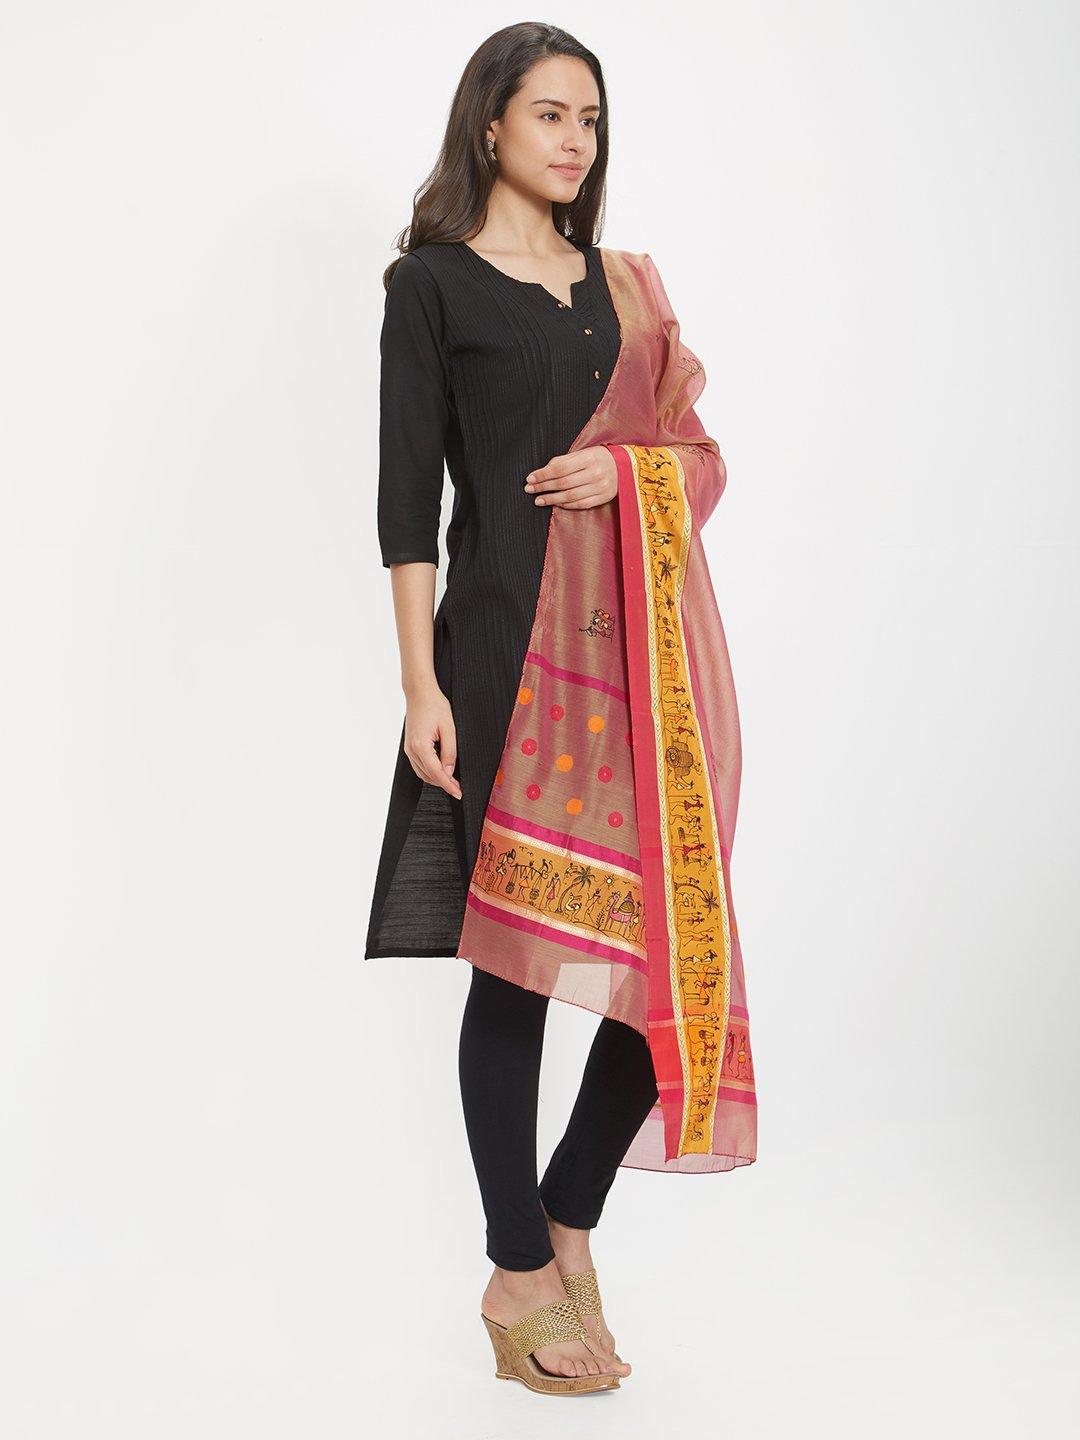 Maheswari Silk  Stole with Hand-painted Tribal Art - Crafts Collection